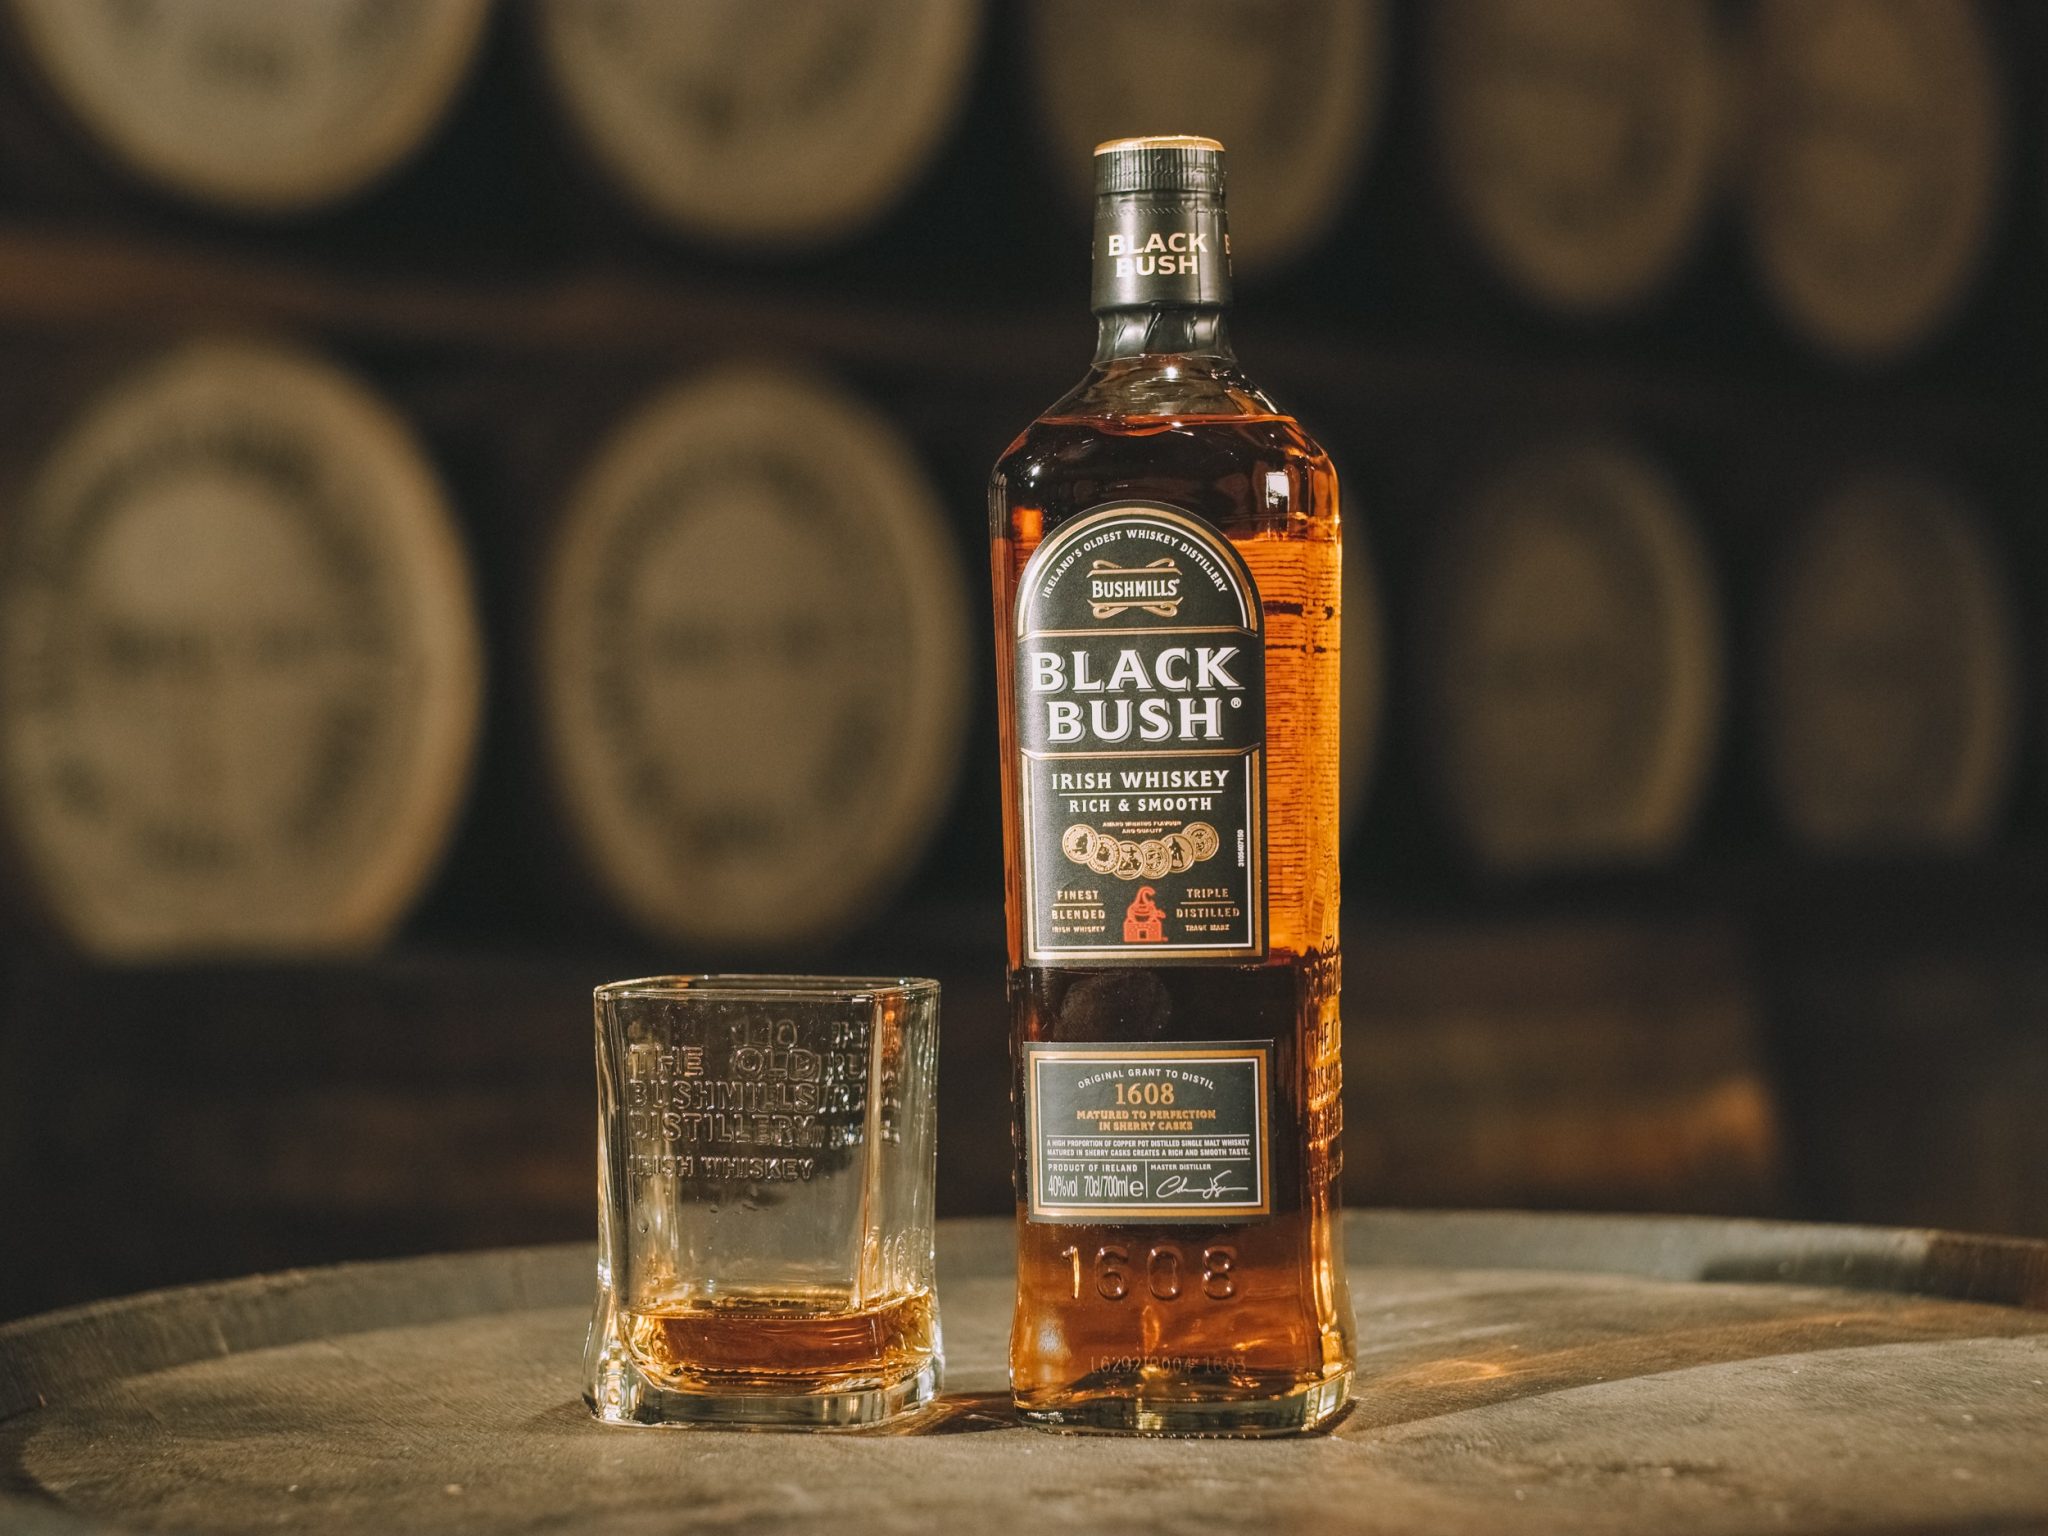 Bushmills under the lens at collaboration event